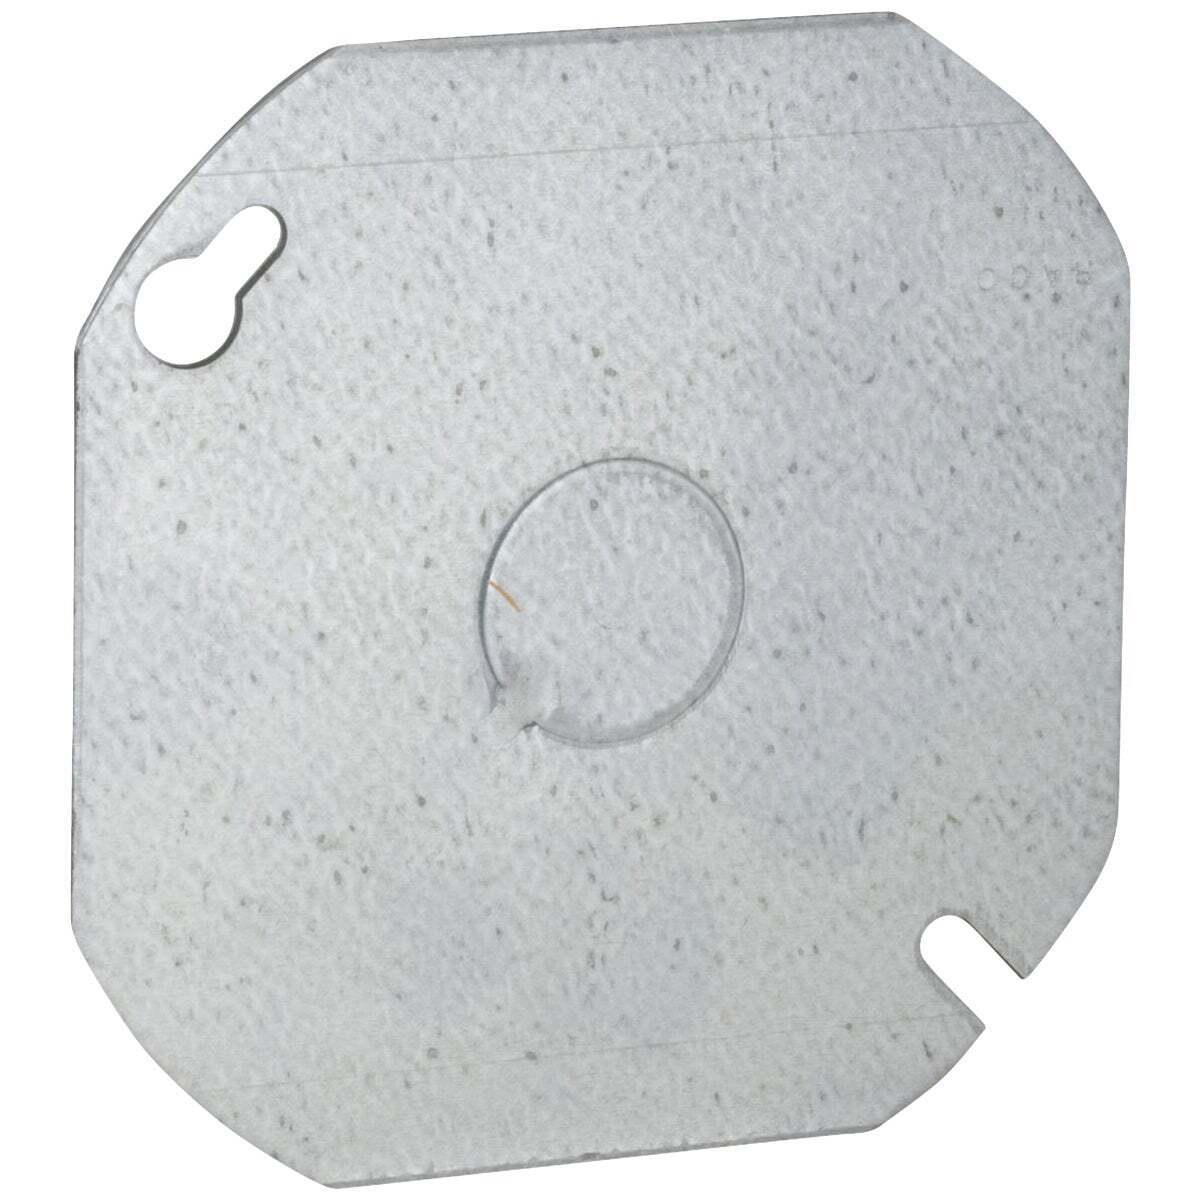 Picture of Southwire 54C6-UPC 4 x 0.5 in. Steel Metallic Flat Blank Round Cover